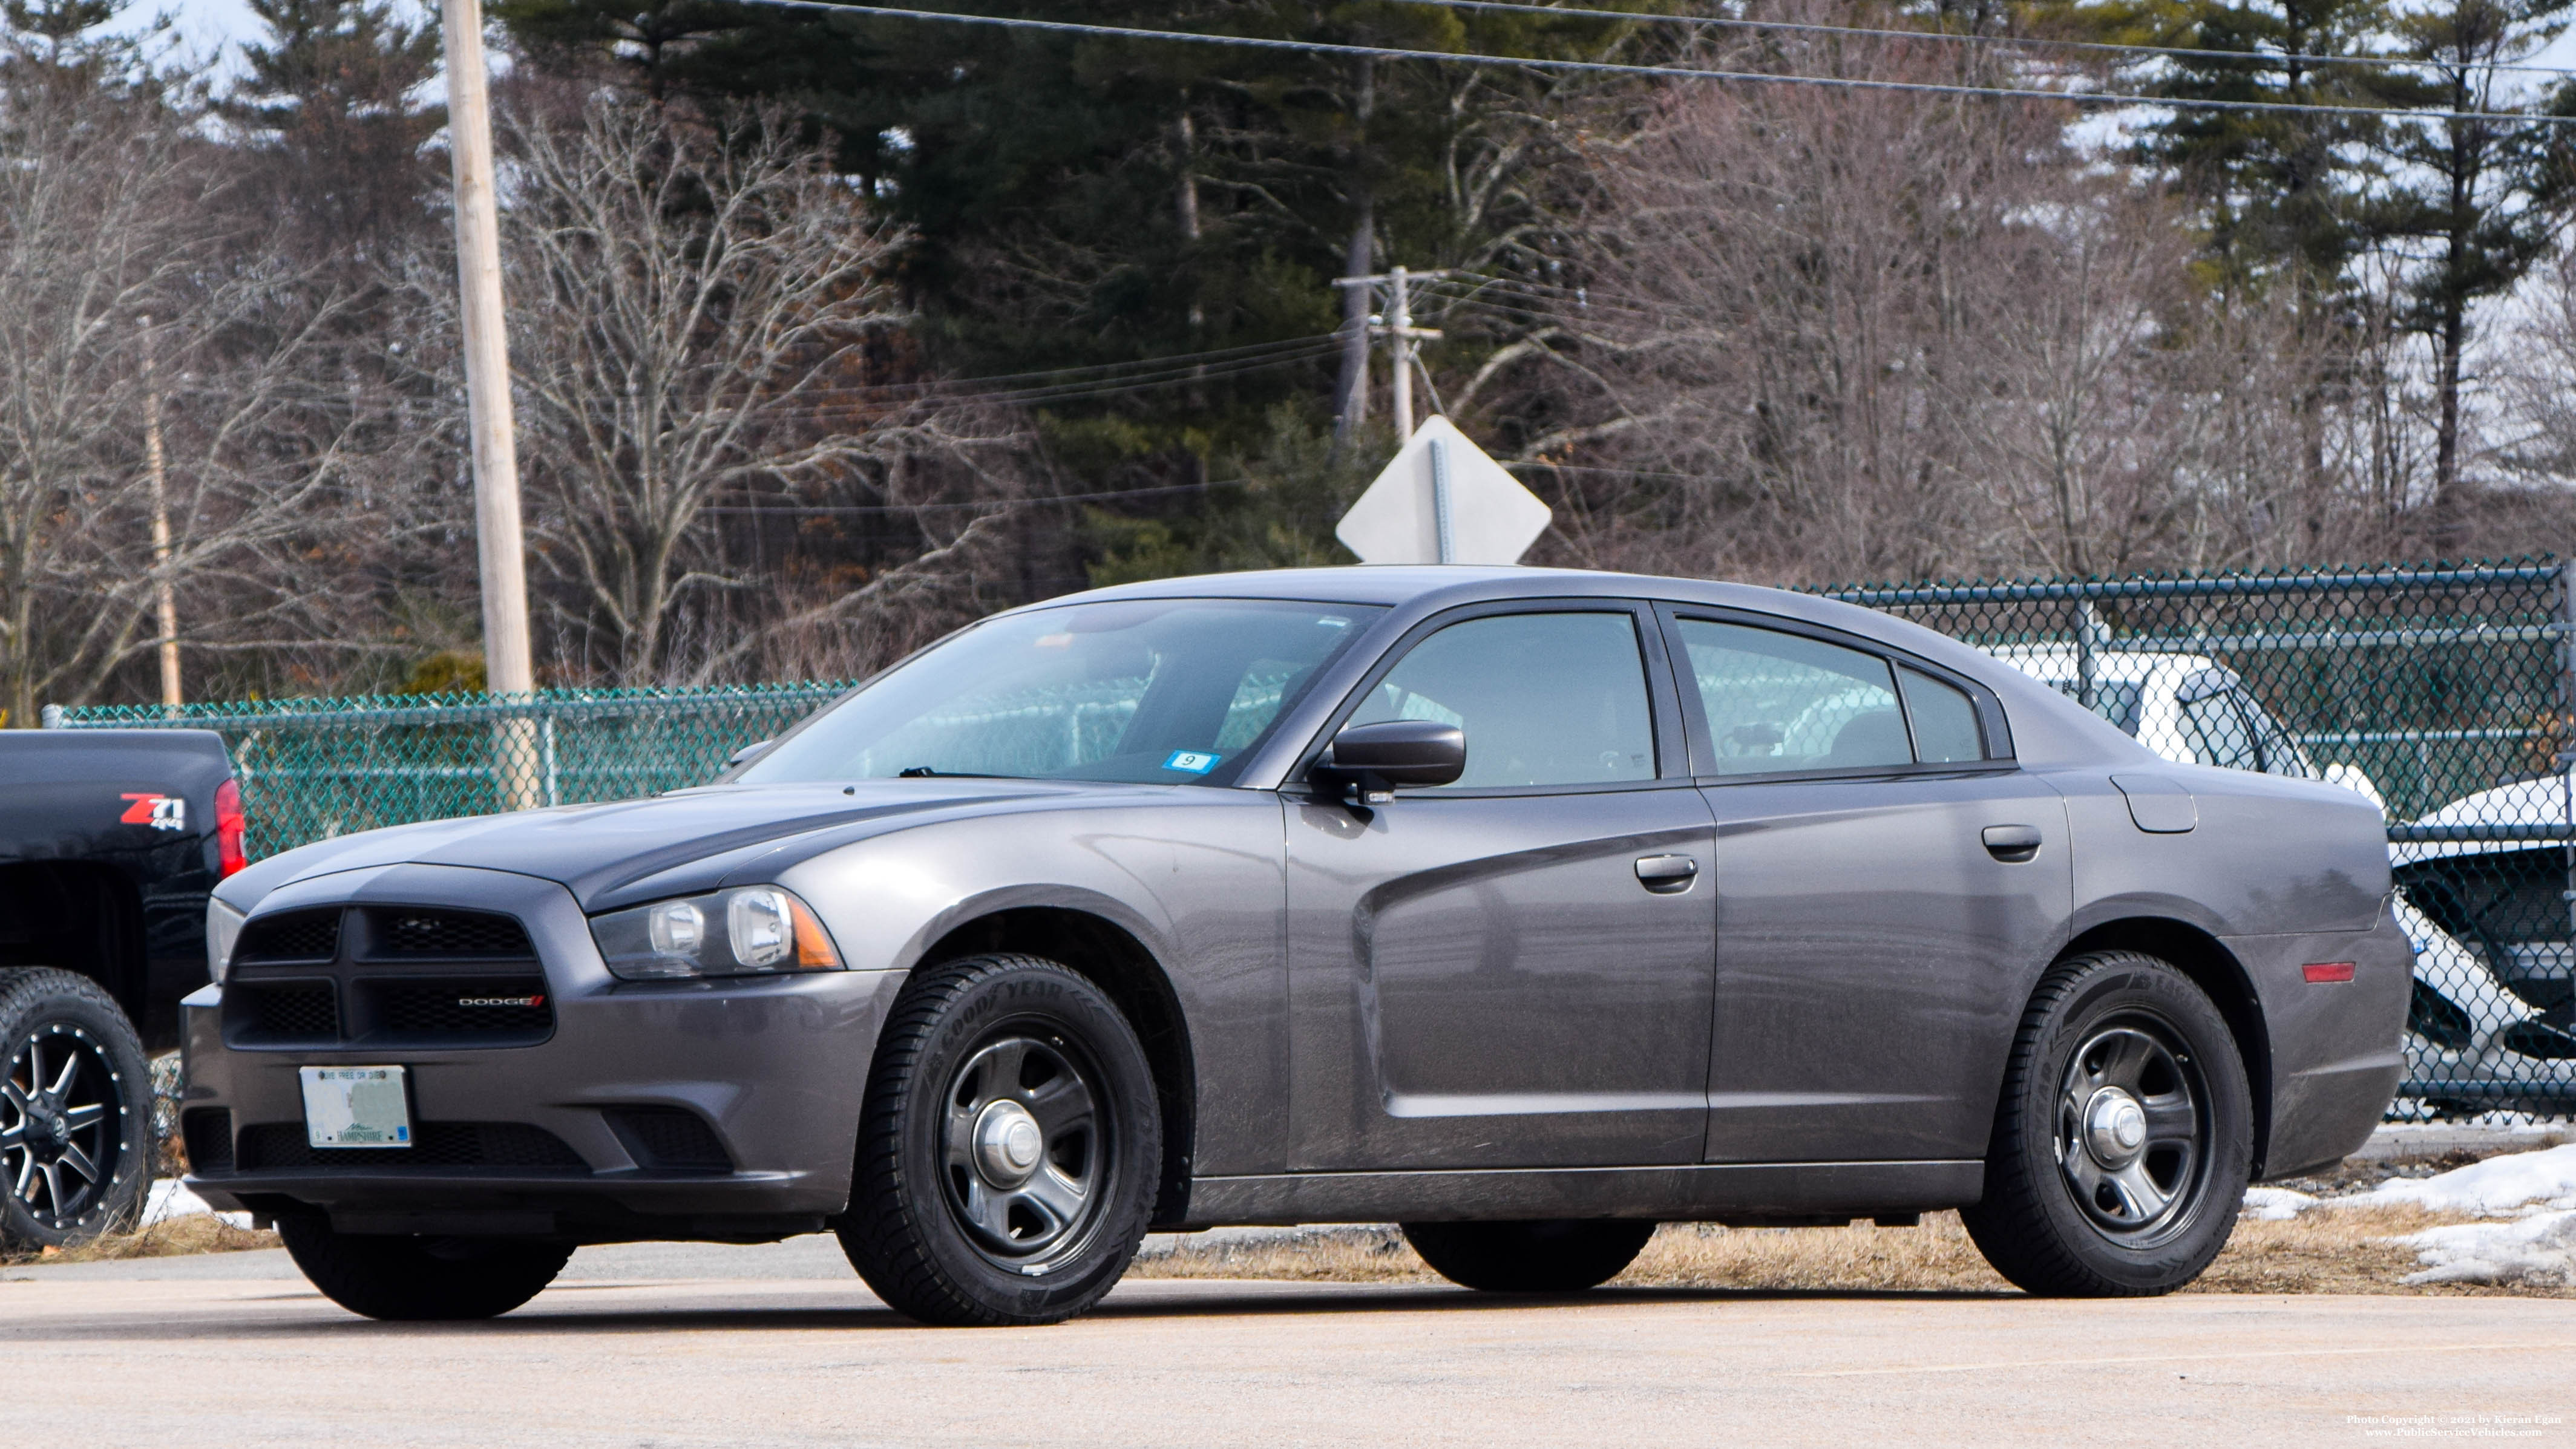 A photo  of New Hampshire State Police
            Cruiser 251, a 2011-2014 Dodge Charger             taken by Kieran Egan